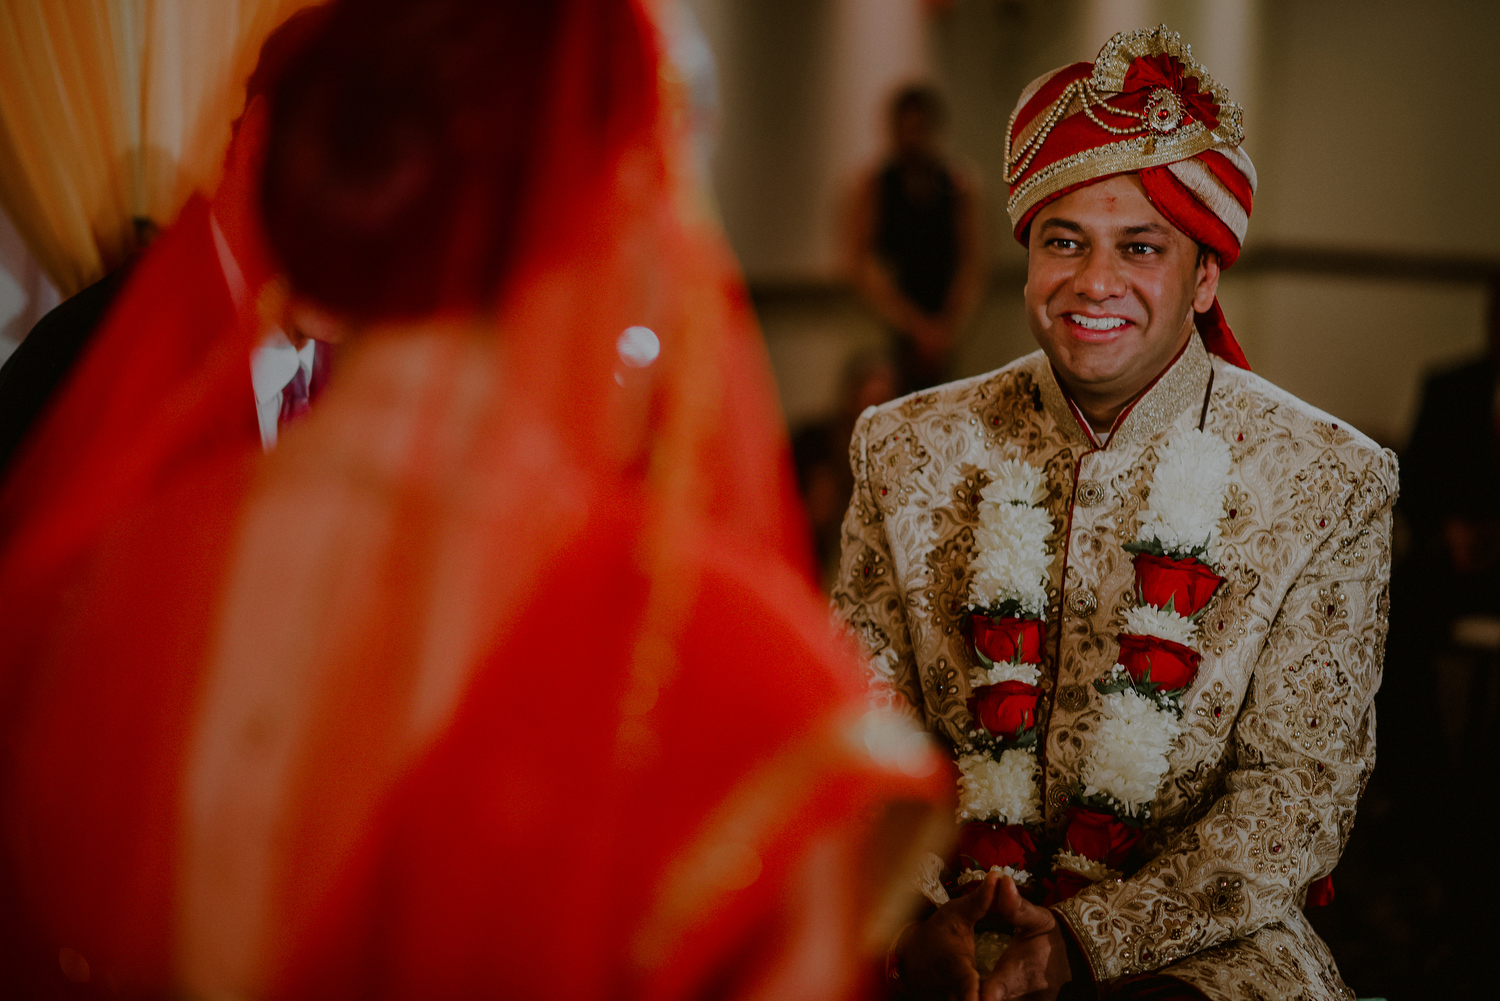 groom looks lovingly at bride during indian wedding ceremony